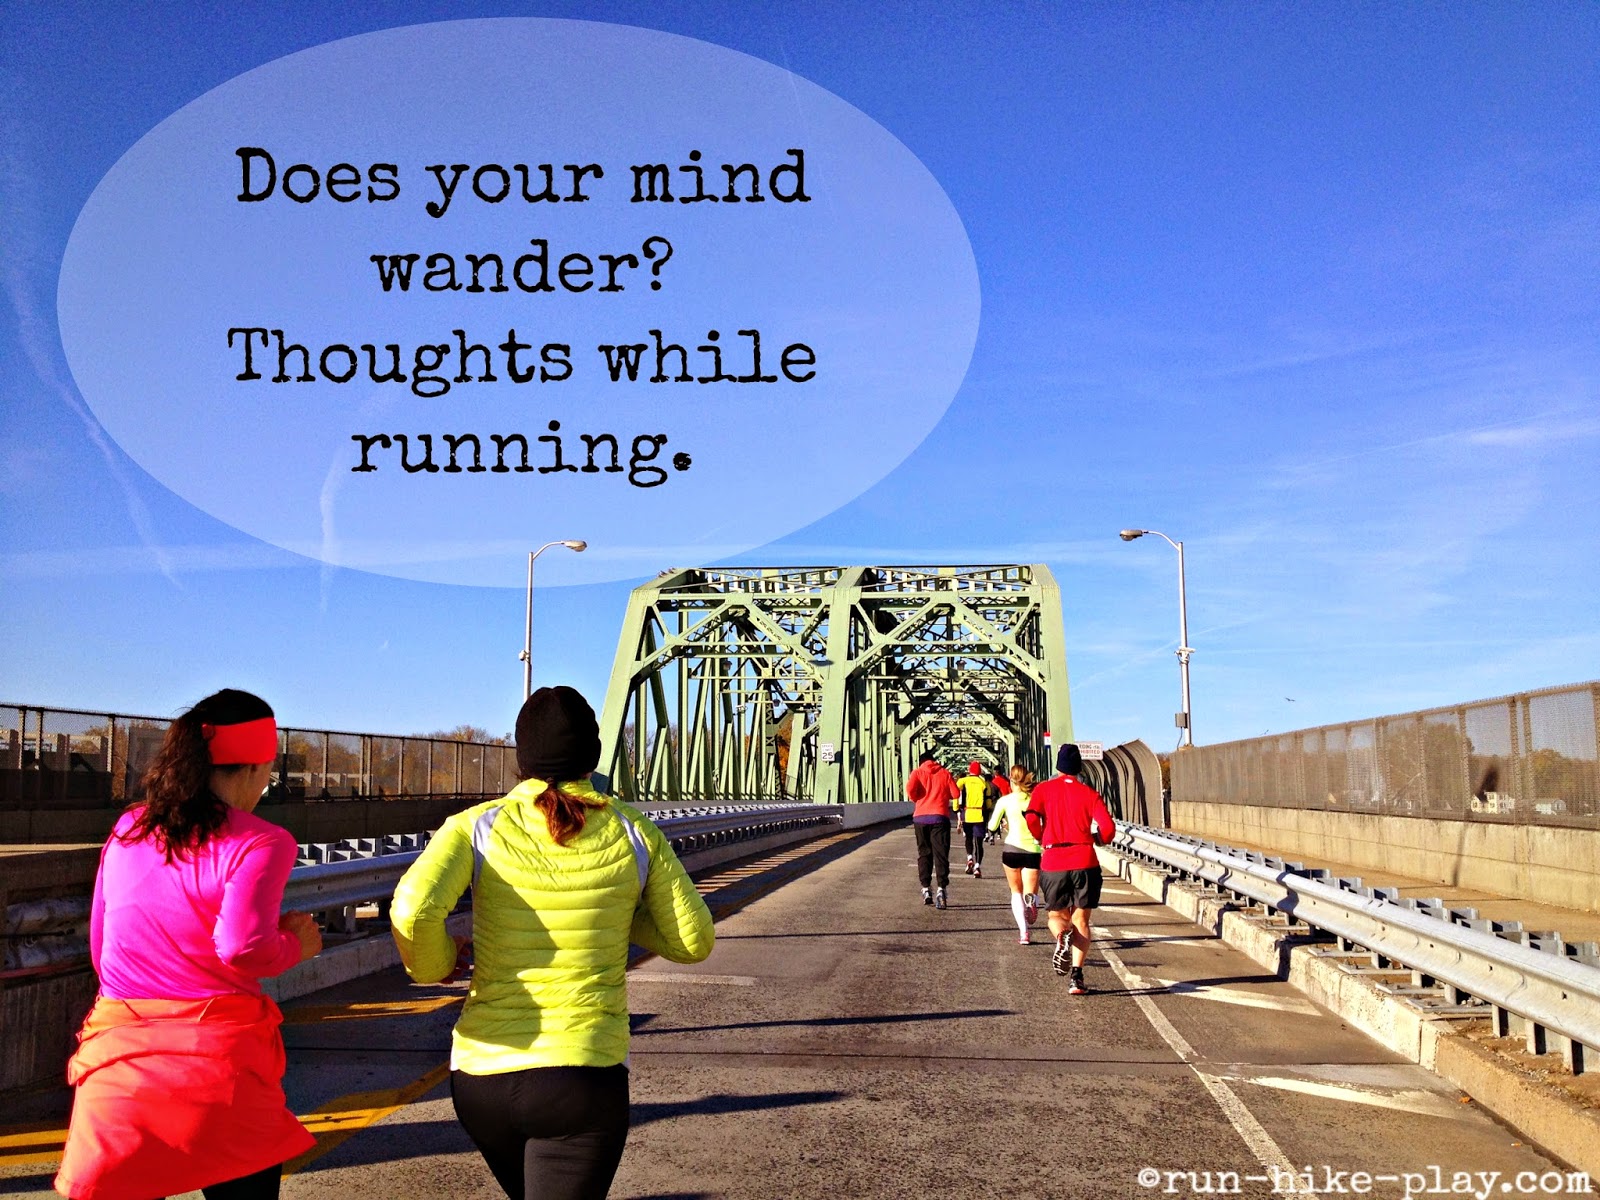 Thoughts while running